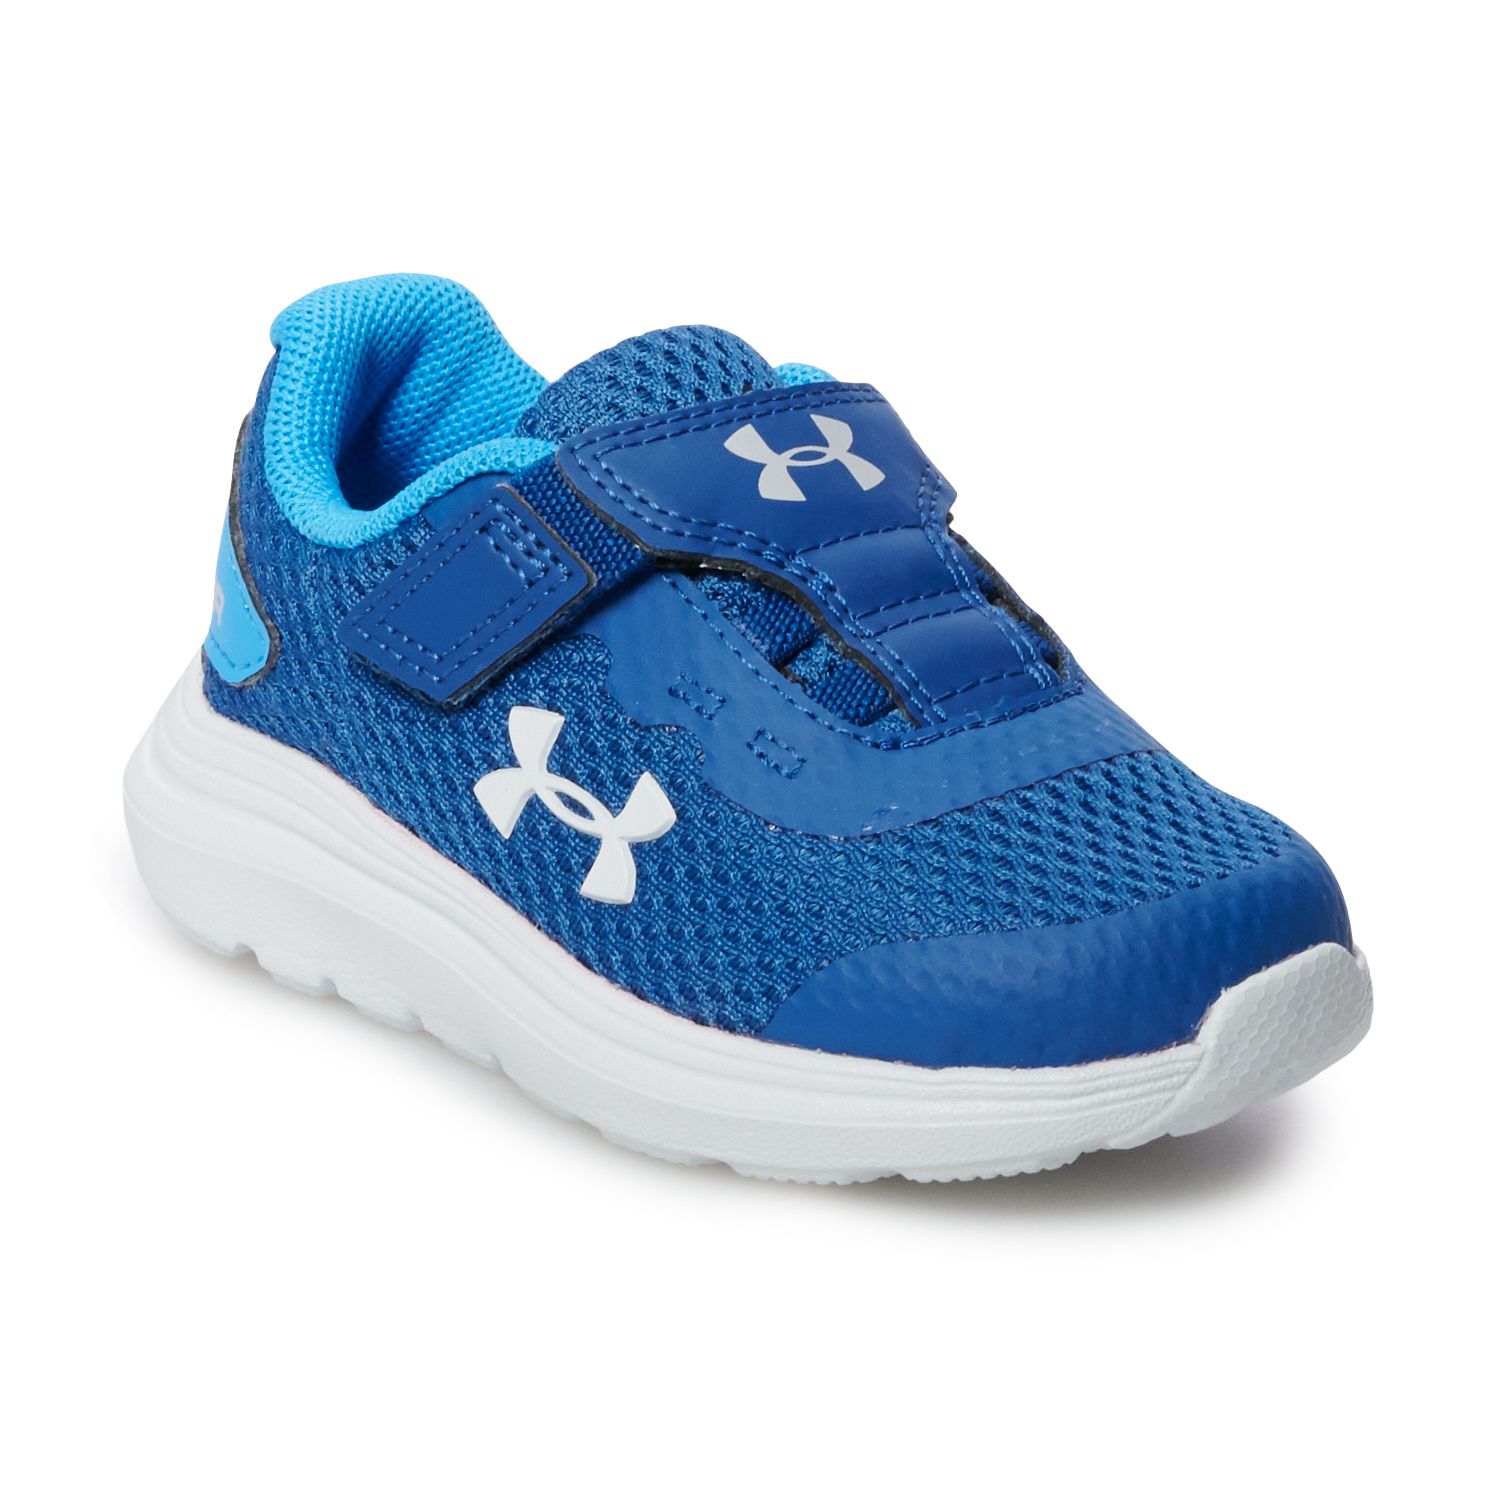 kohl's under armour toddler shoes